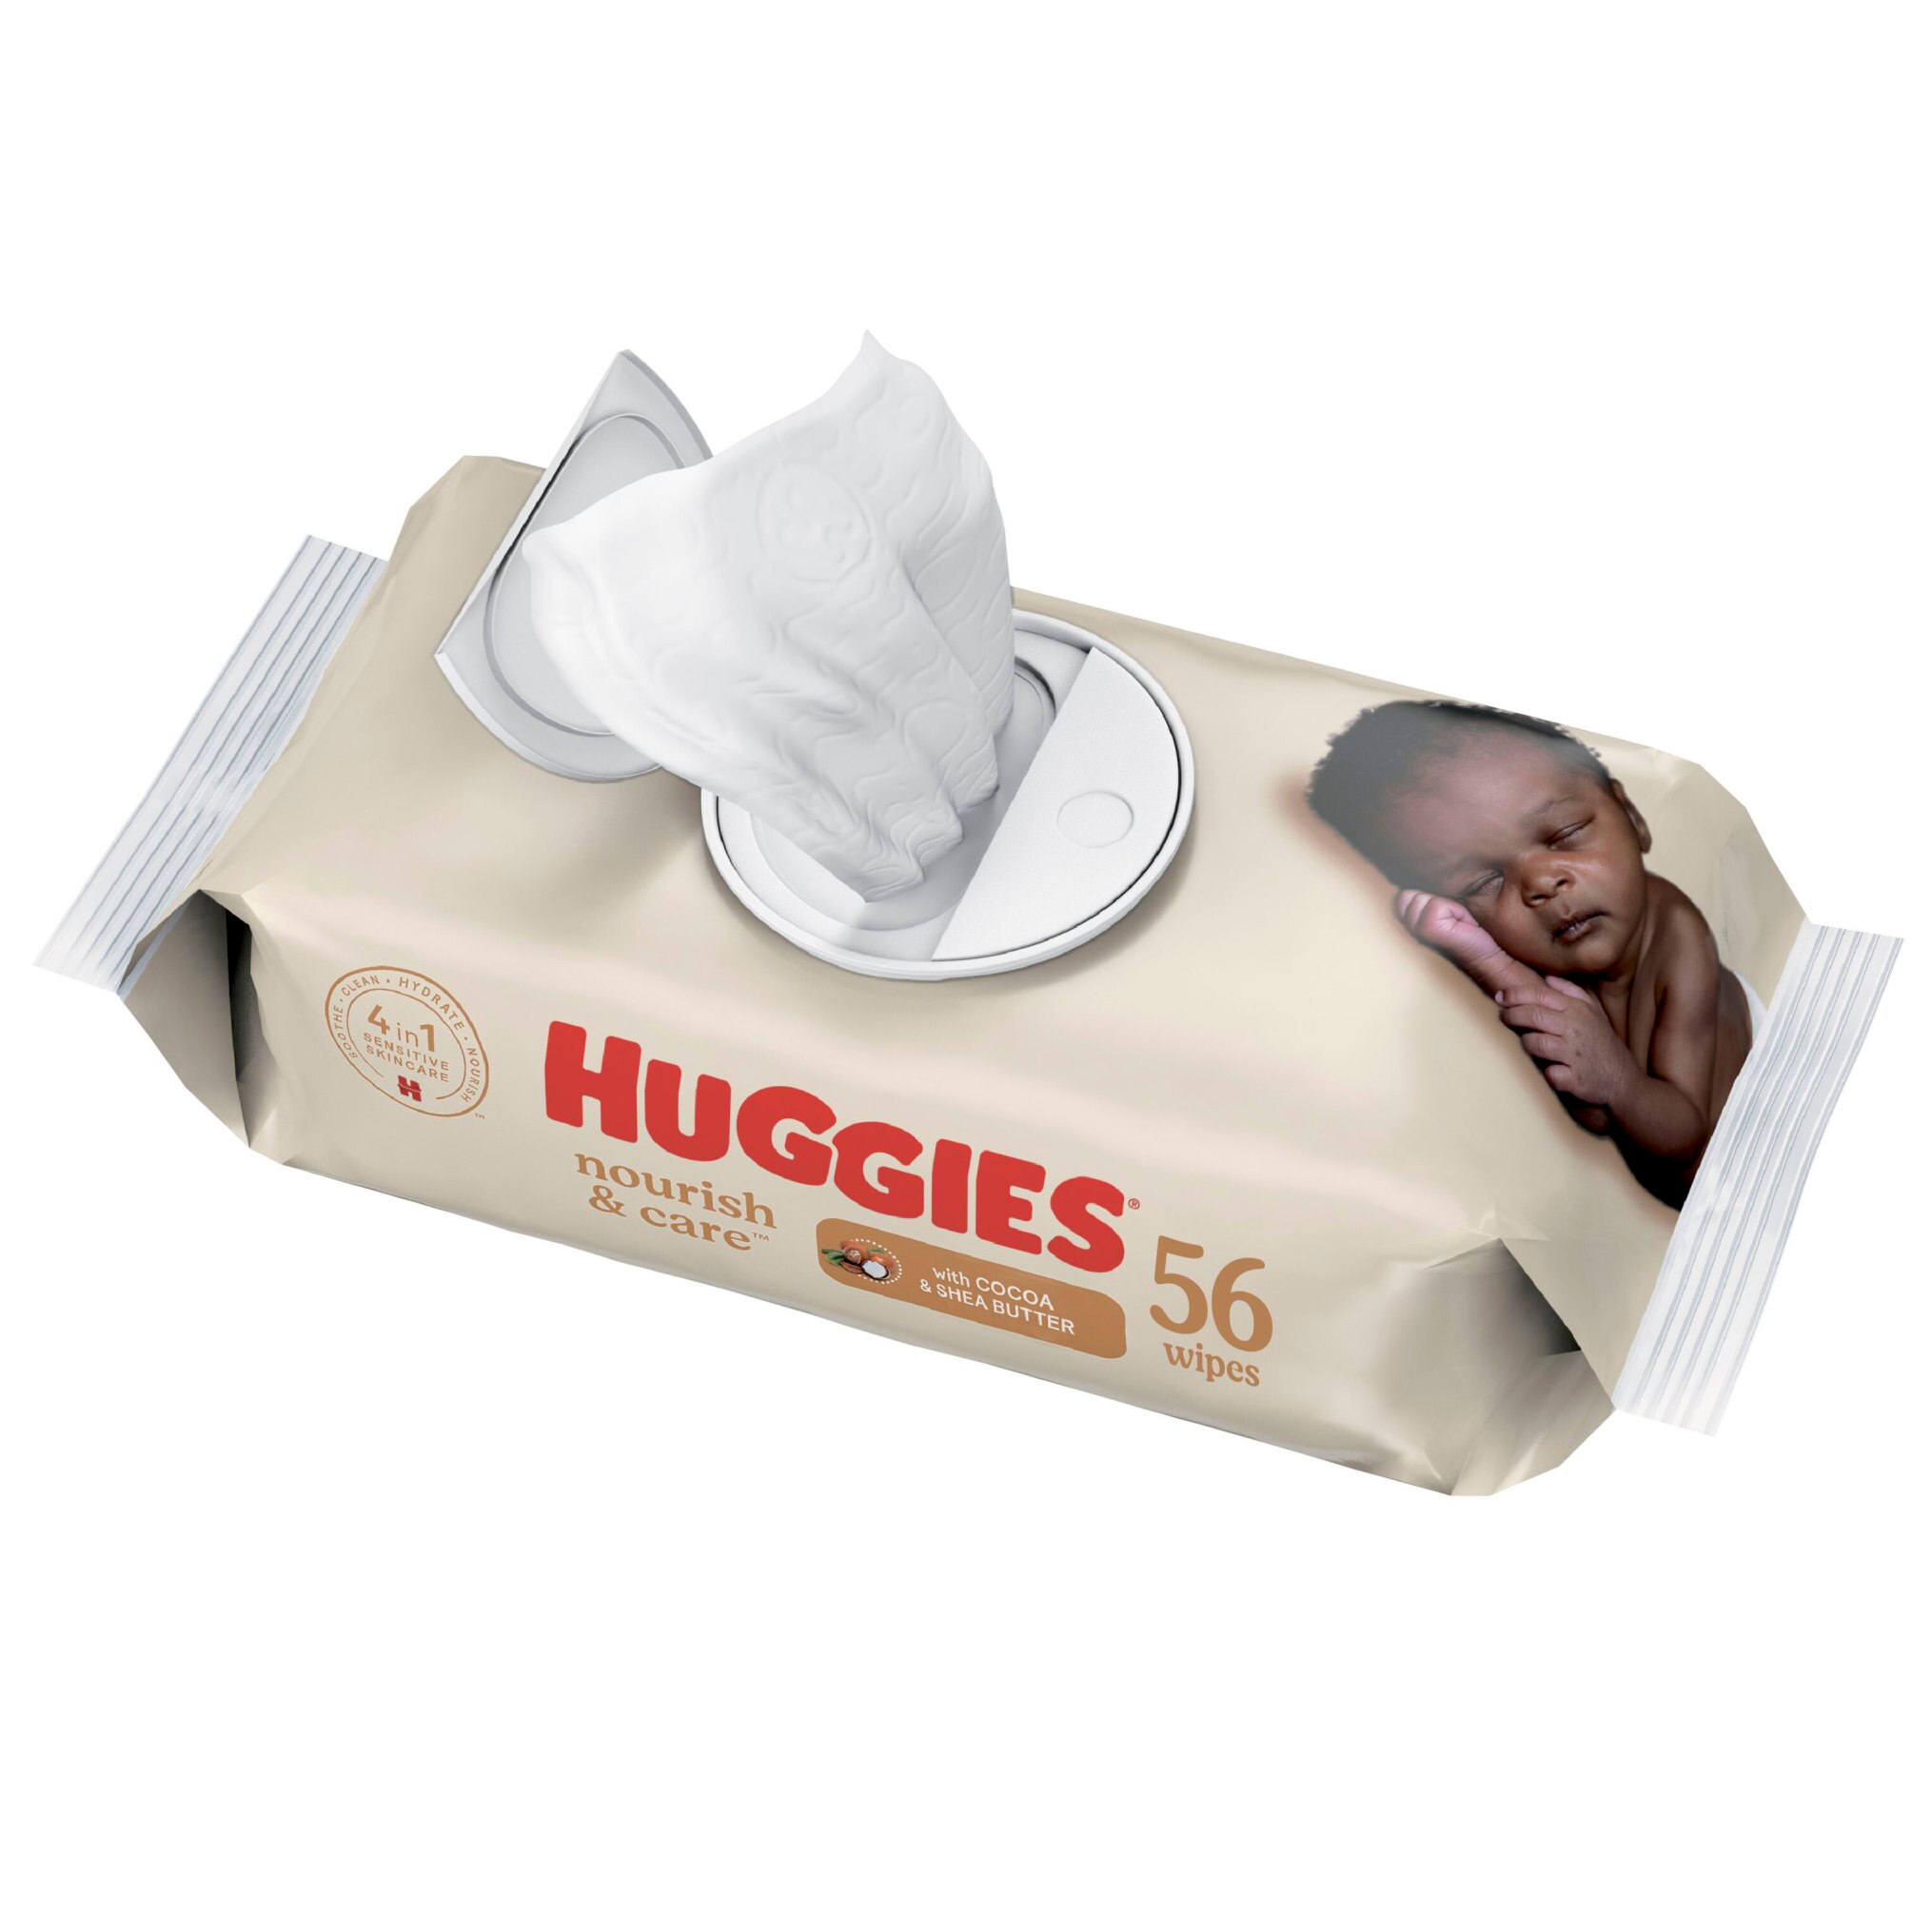 Huggies Nourish & Care Scented Baby Wipes, 56 CT